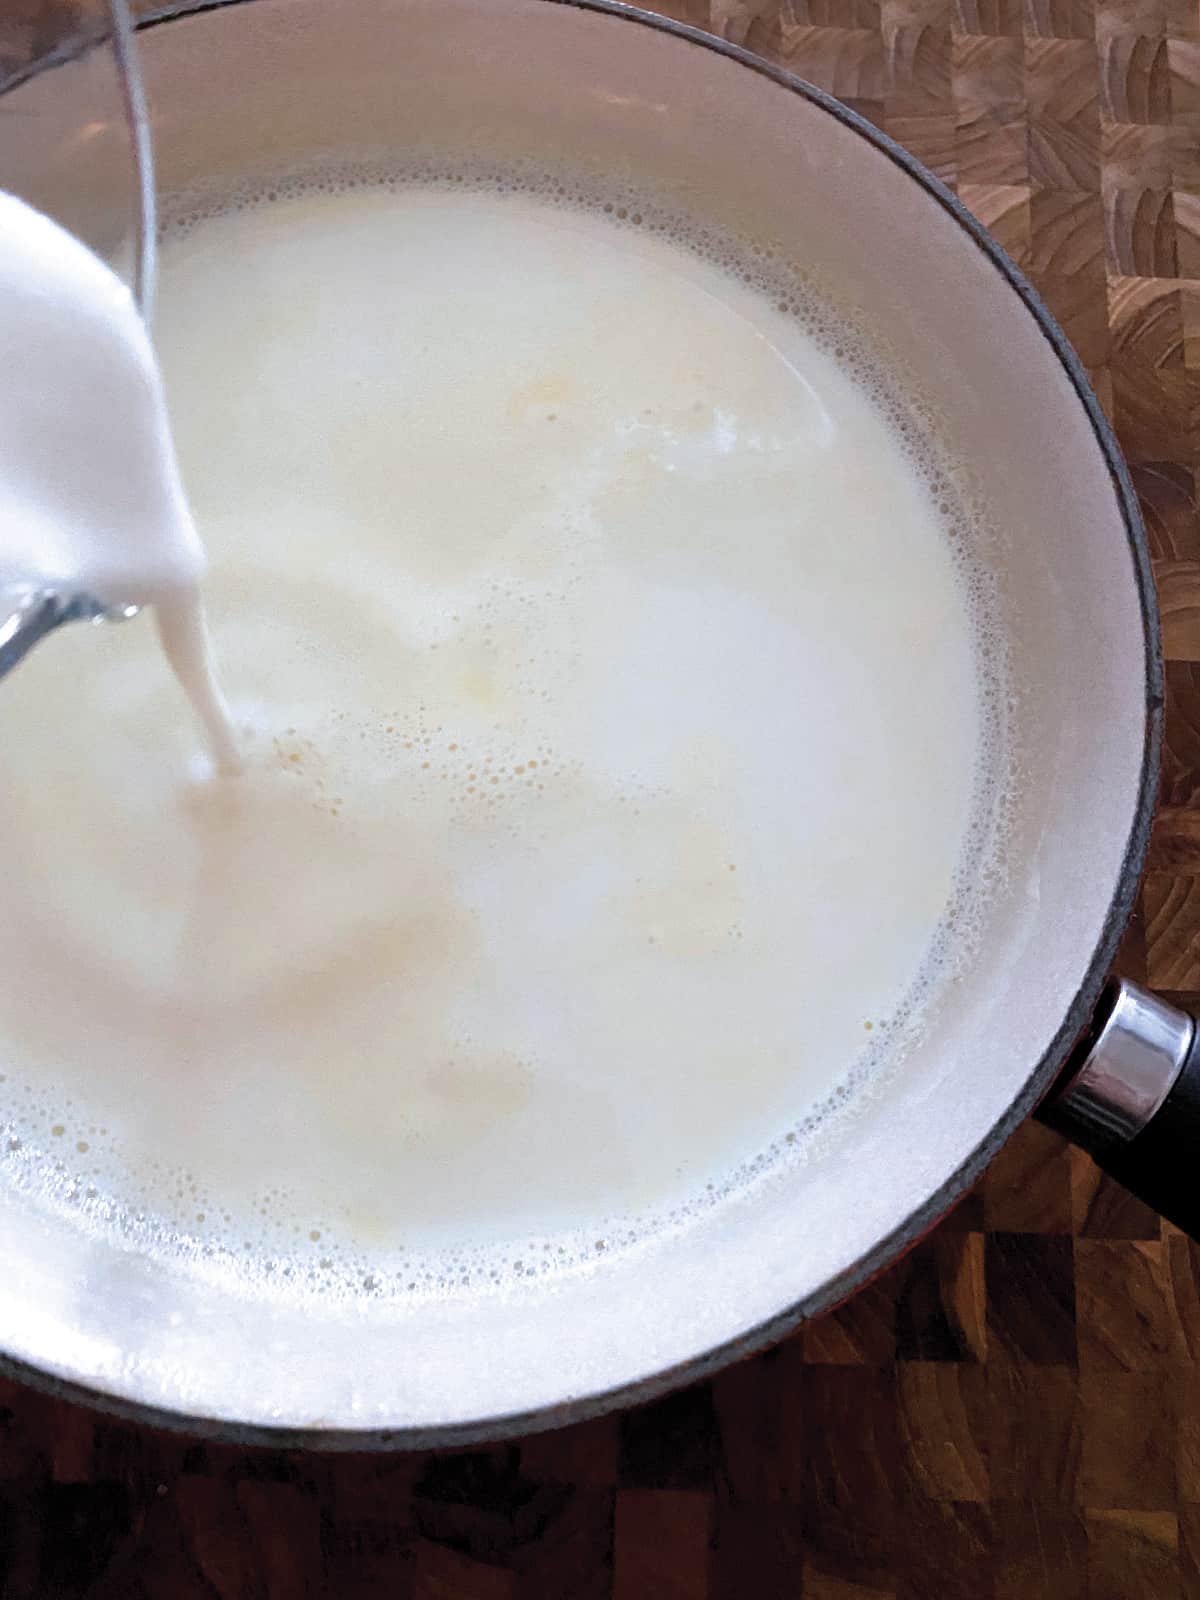 Milk being poured in a sauce pan.